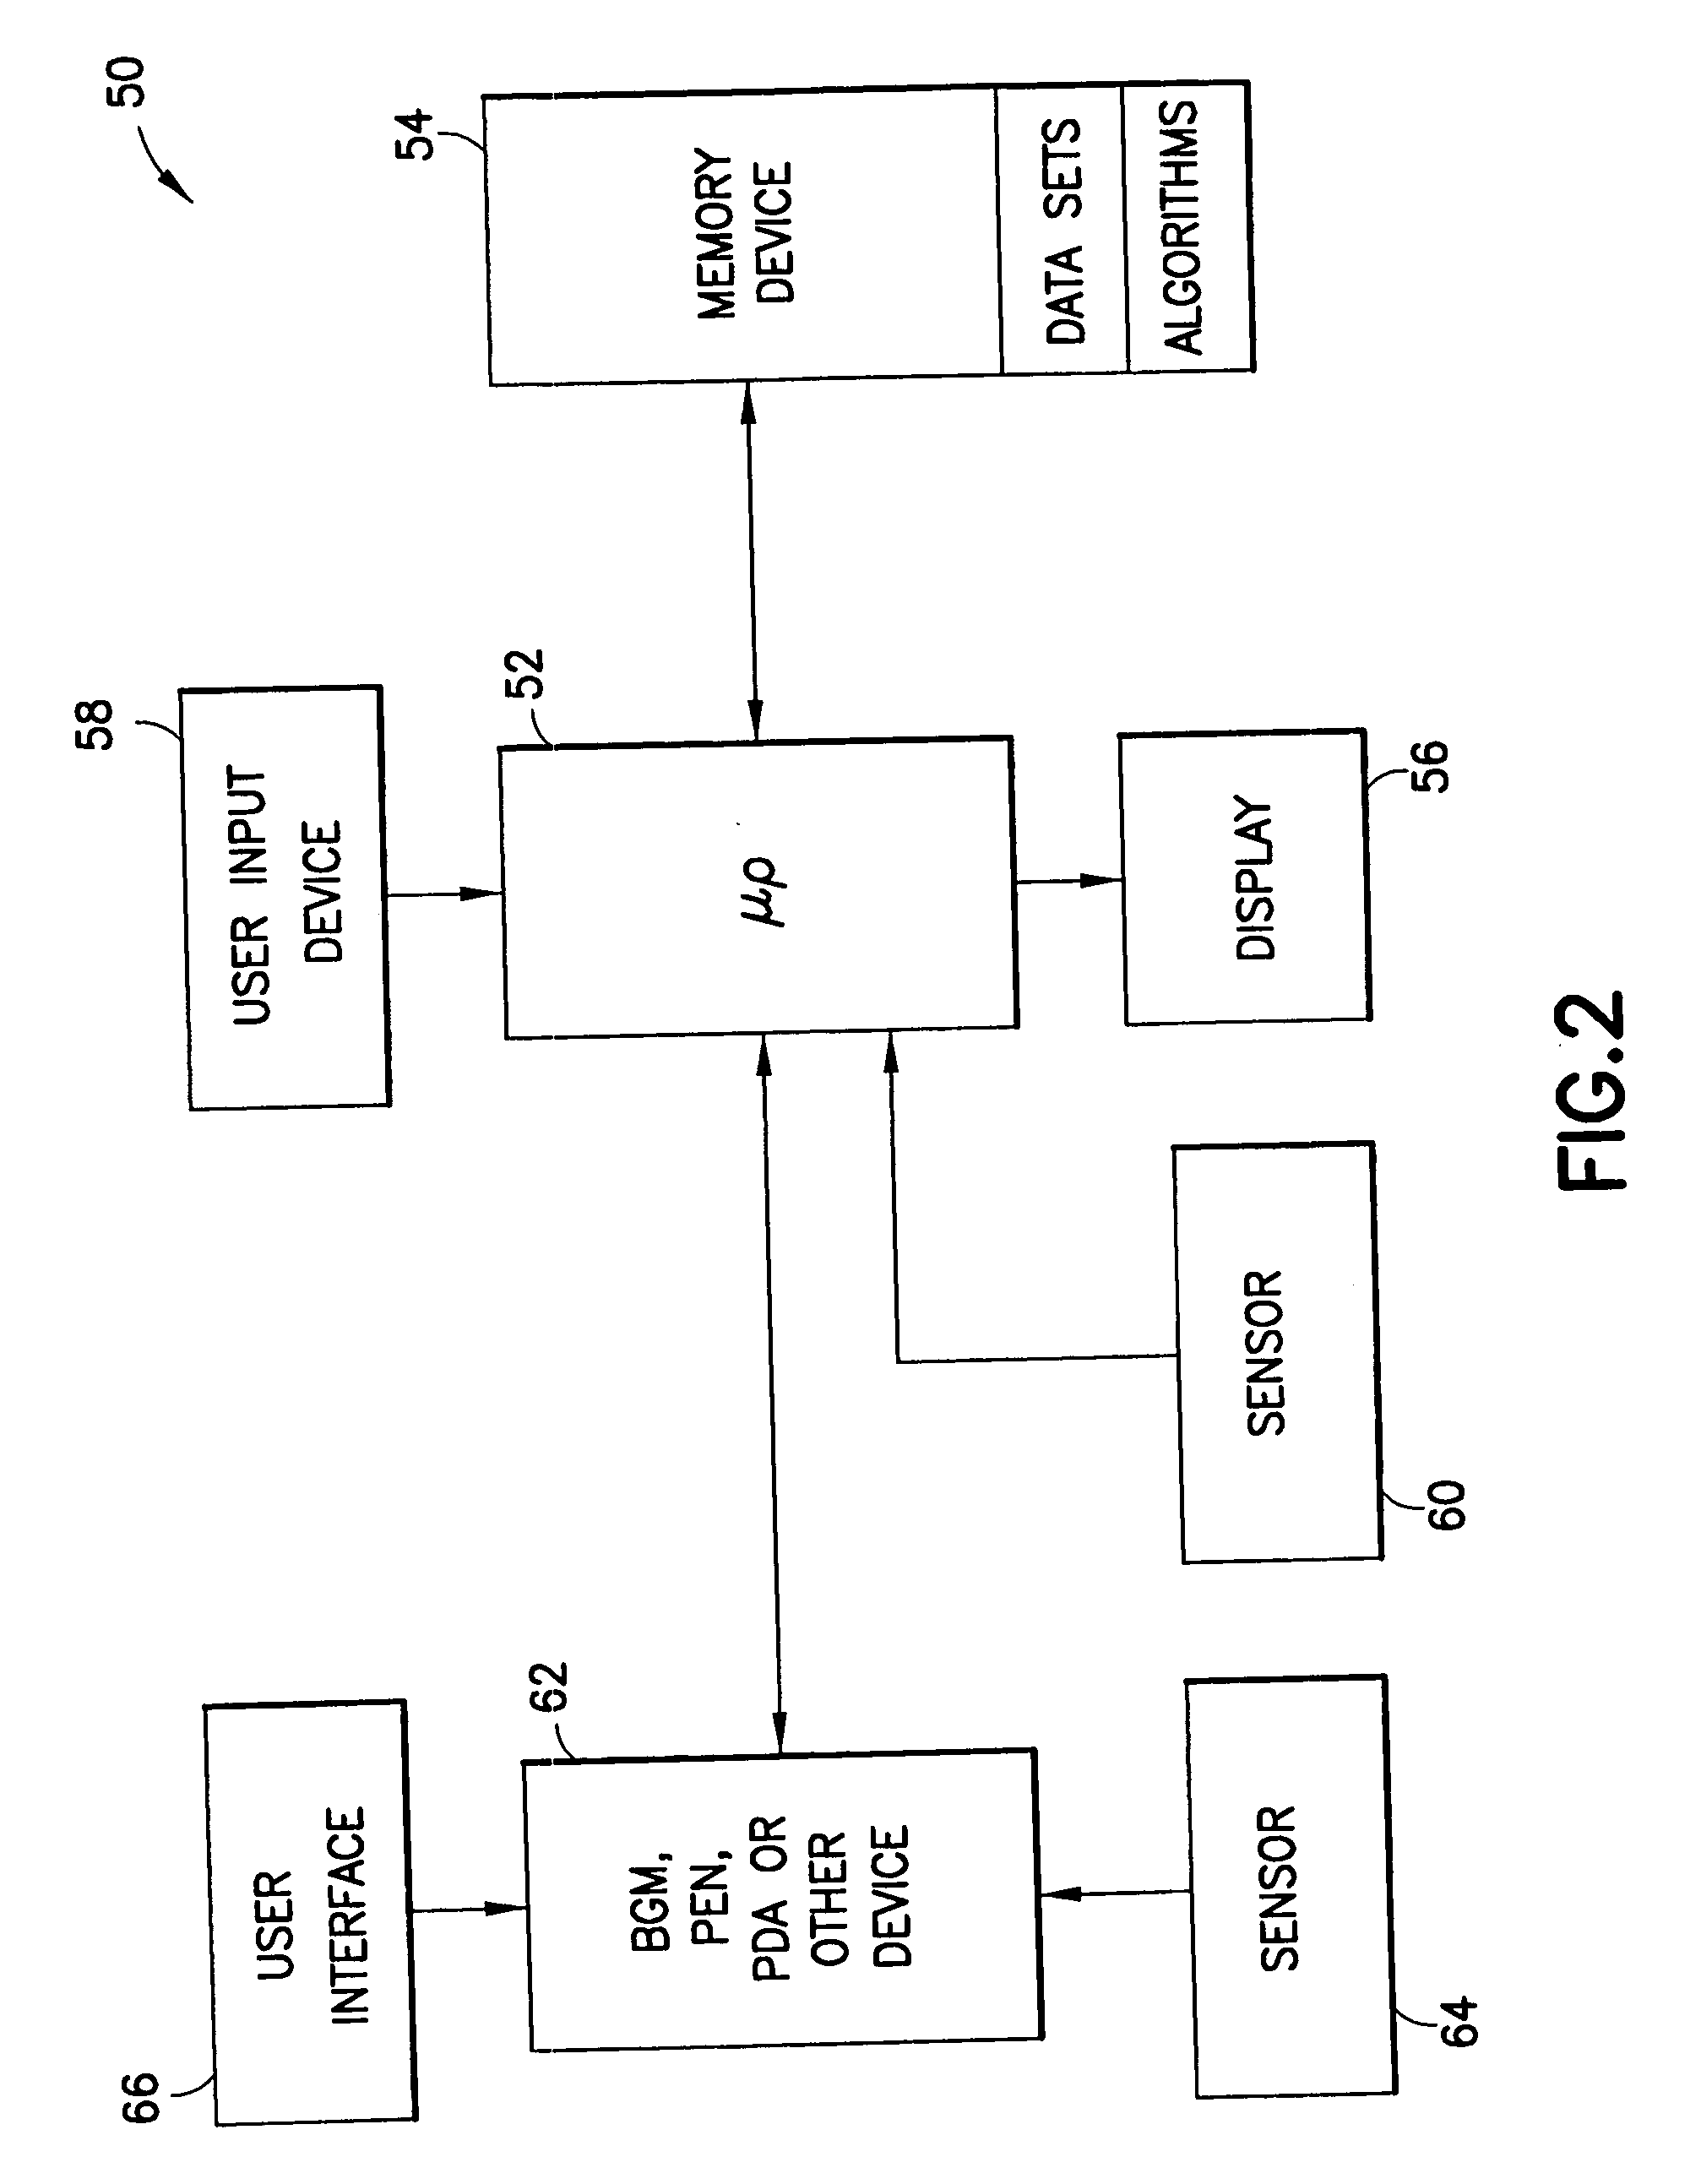 System for determining insulin dose using carbohydrate to insulin ratio and insulin sensitivity factor